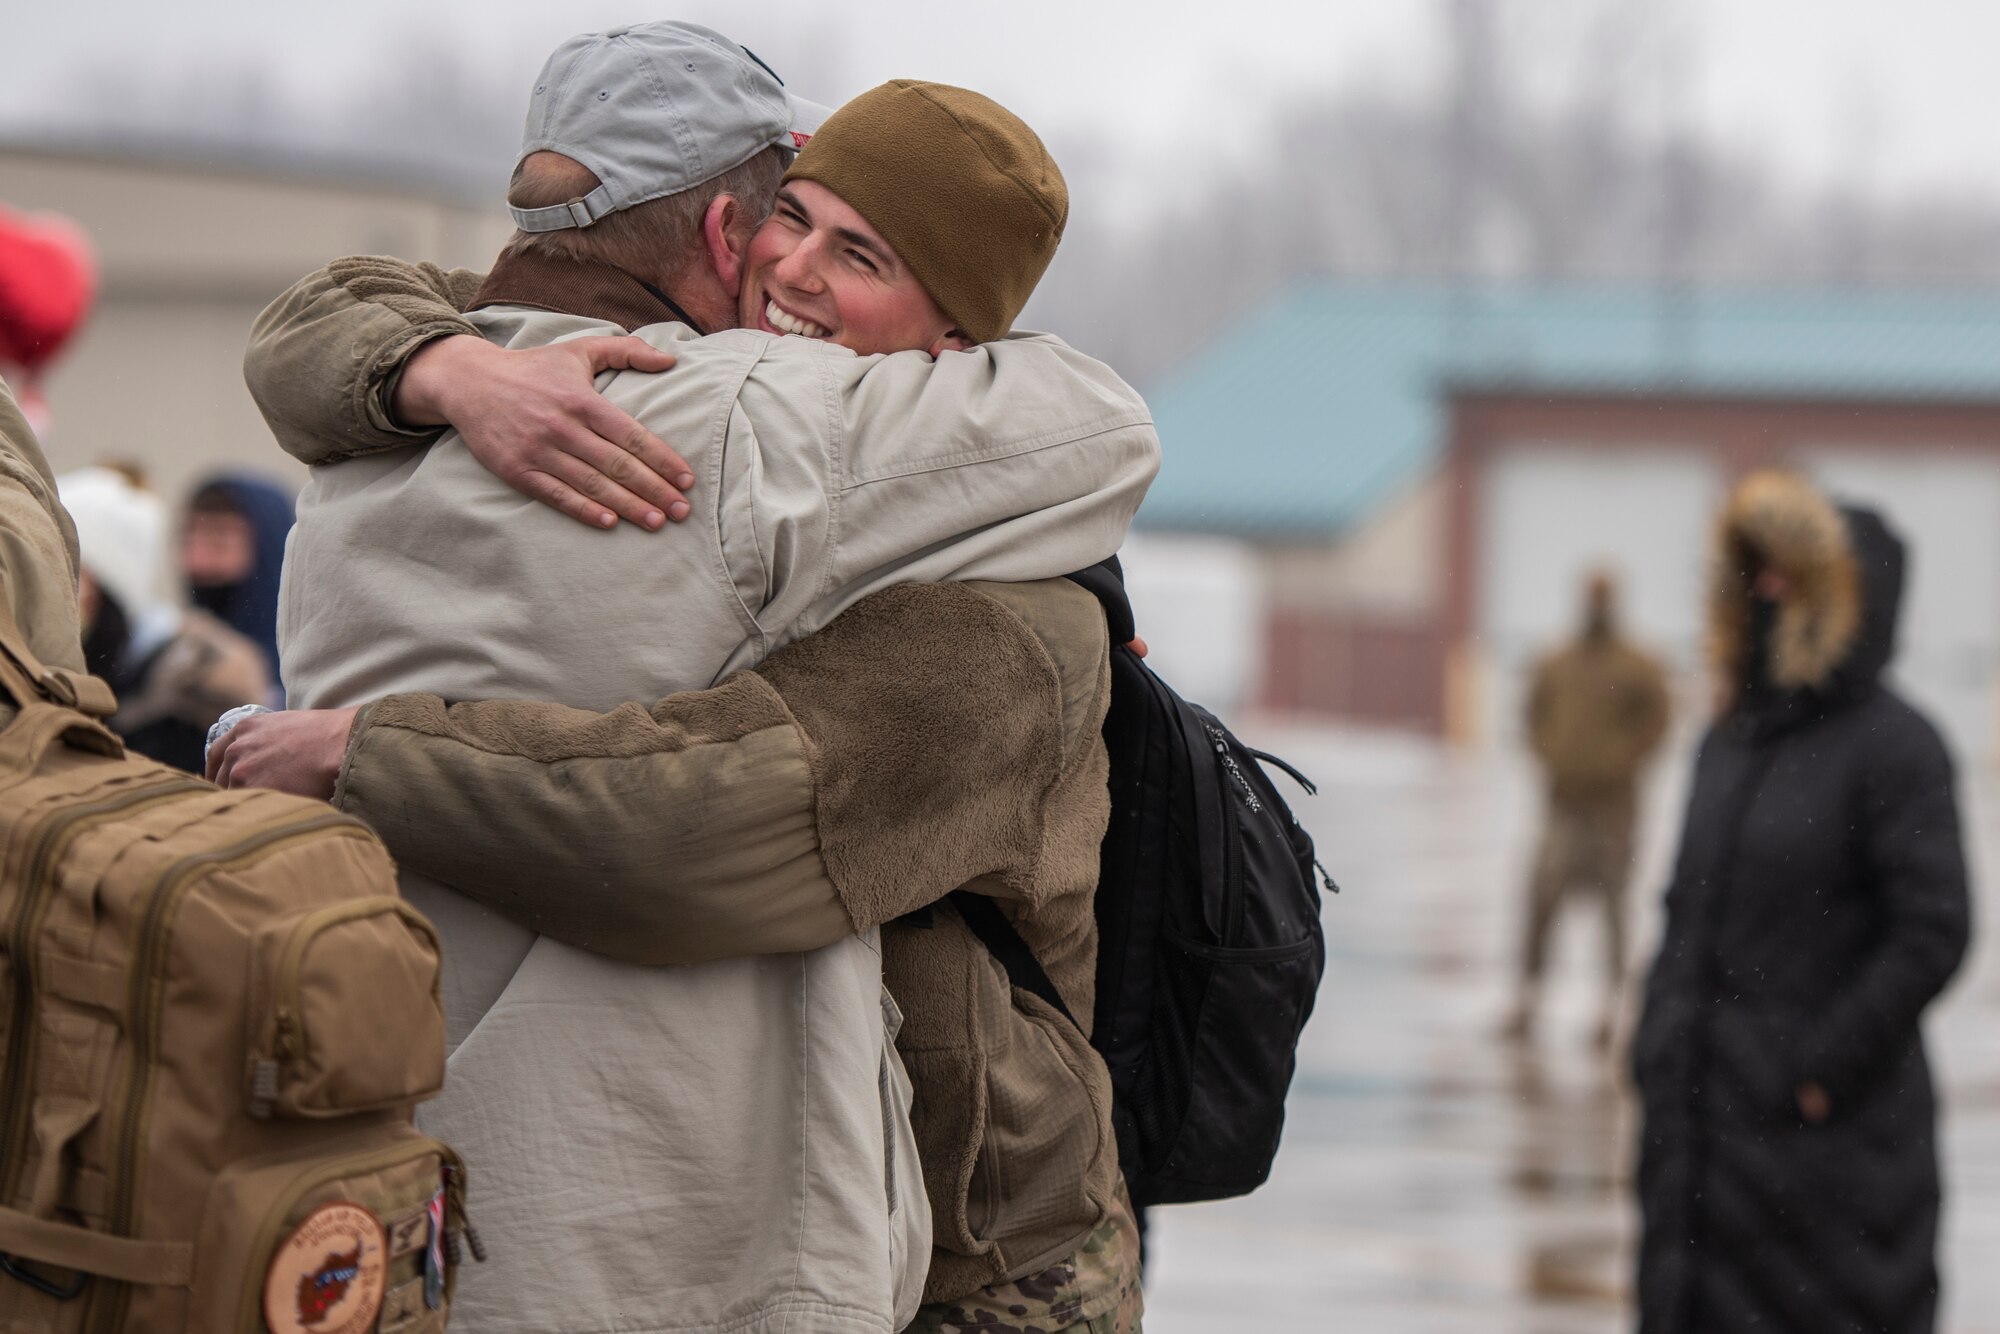 Staff Sgt. Alex Iannucci, a crew chief, assigned to the Ohio National Guard’s 180th Fighter Wing, embraces a loved one after returning home from their overseas deployment, Jan. 26, 2020 at the 180FW in Swanton, Ohio.